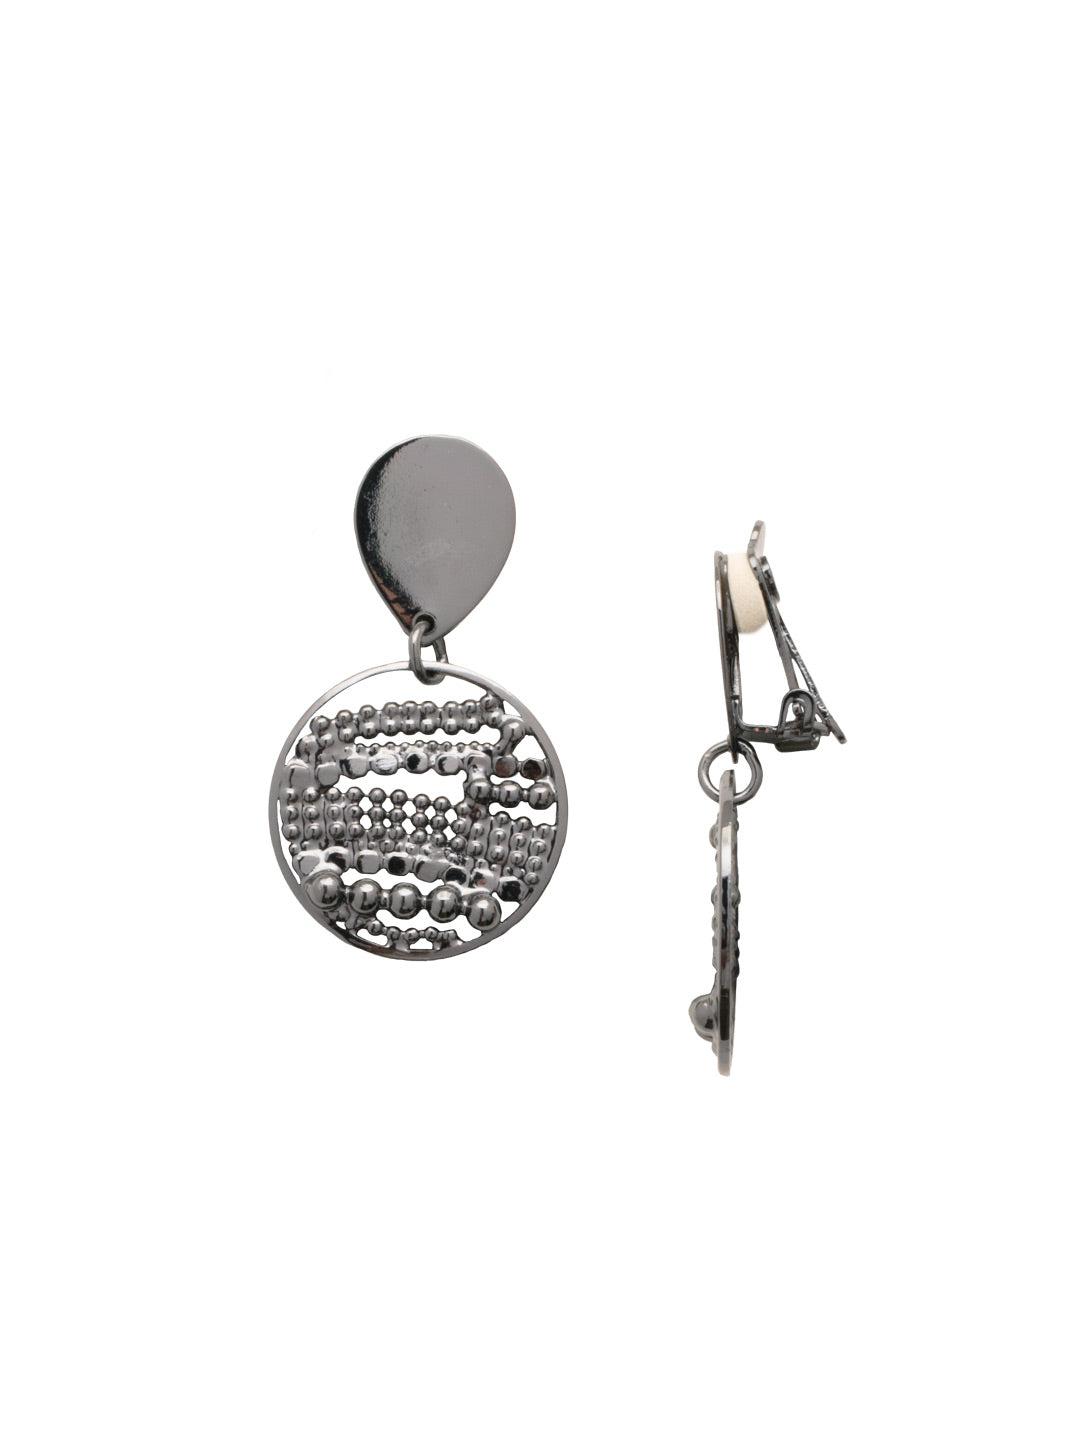 Khaleesi Clip On Earring - 4EFC150CGMCRY - The Khaleesi Clip On Earrings feature scale-like metal work details within a gun metal finish hoop, dangling from a clip on disk. From Sorrelli's Crystal collection in our Gun Metal finish.